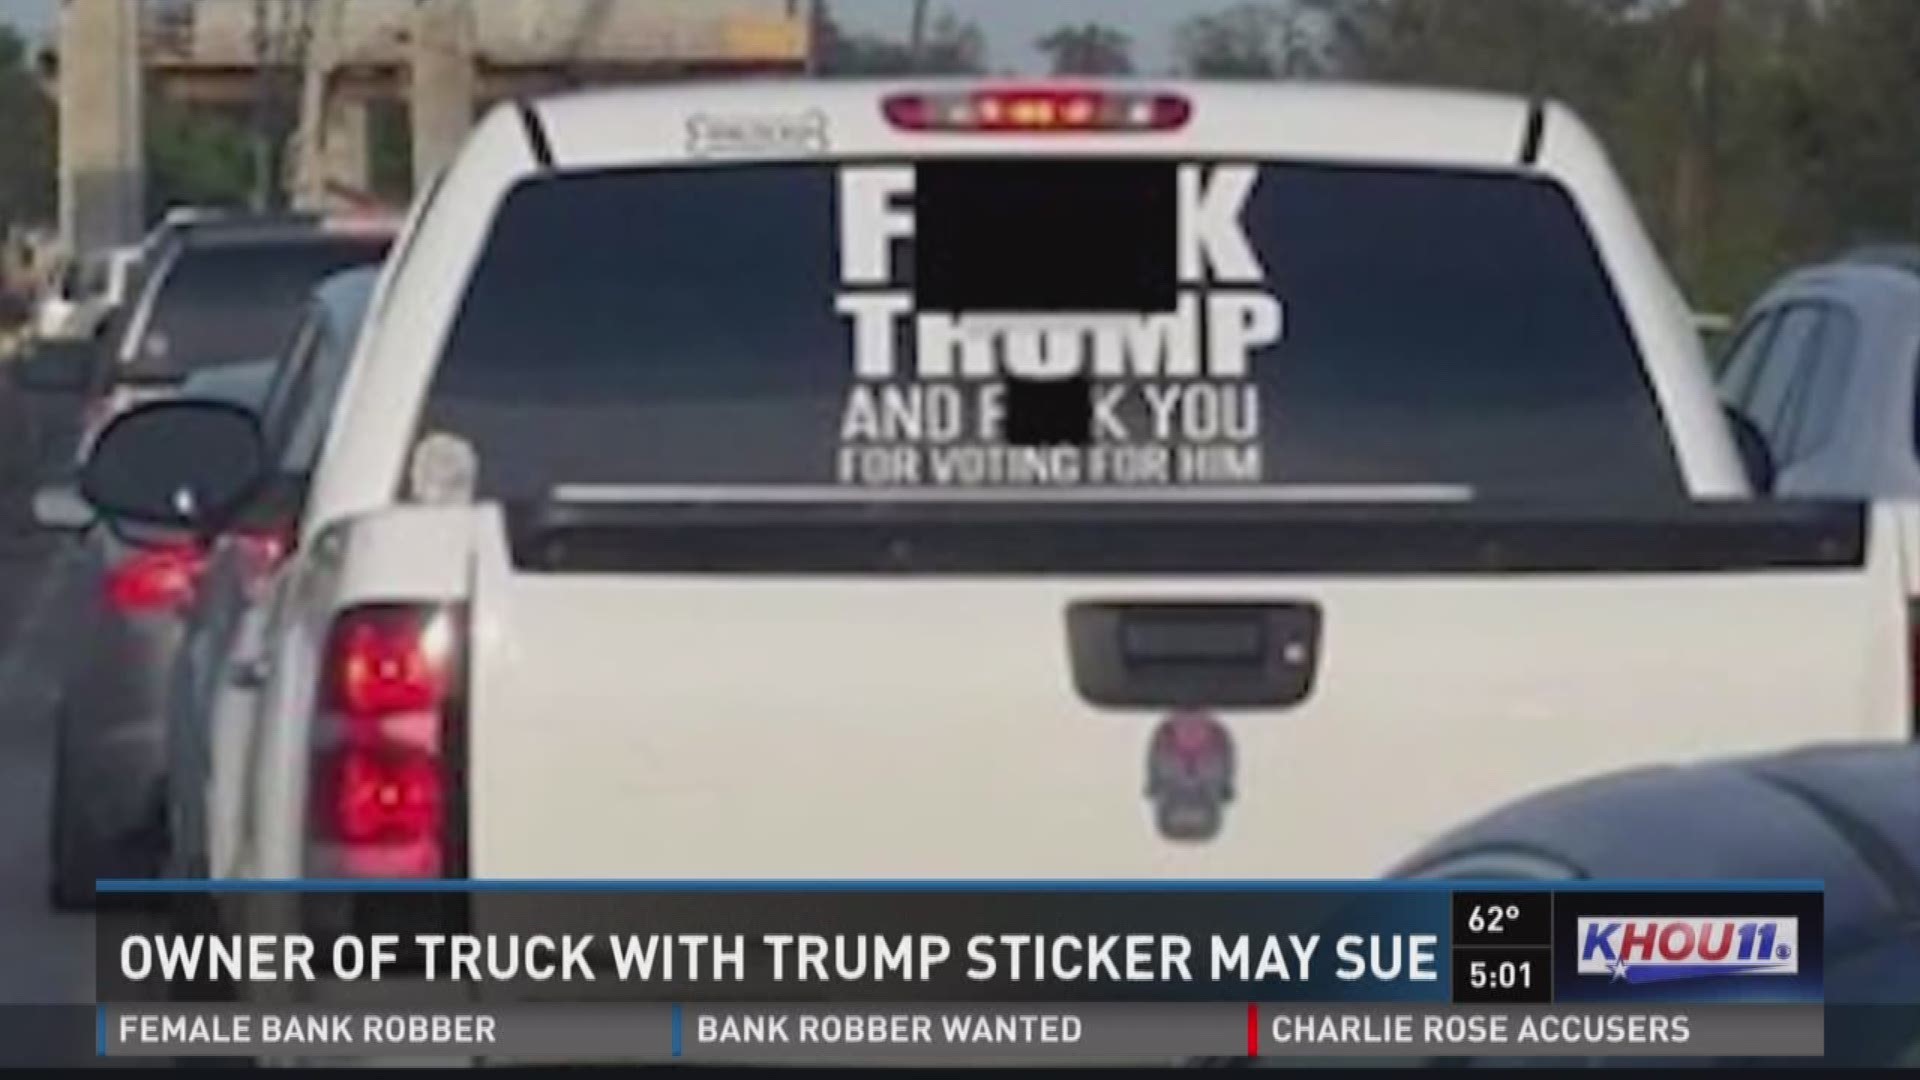 The owner of the truck with the controversial "F__k Trump" sticker said she's considering a civil rights lawsuit against Fort Bend County Sheriff Troy Nehls. Karen Fonseca and her family are making it clear they aren't backing down.